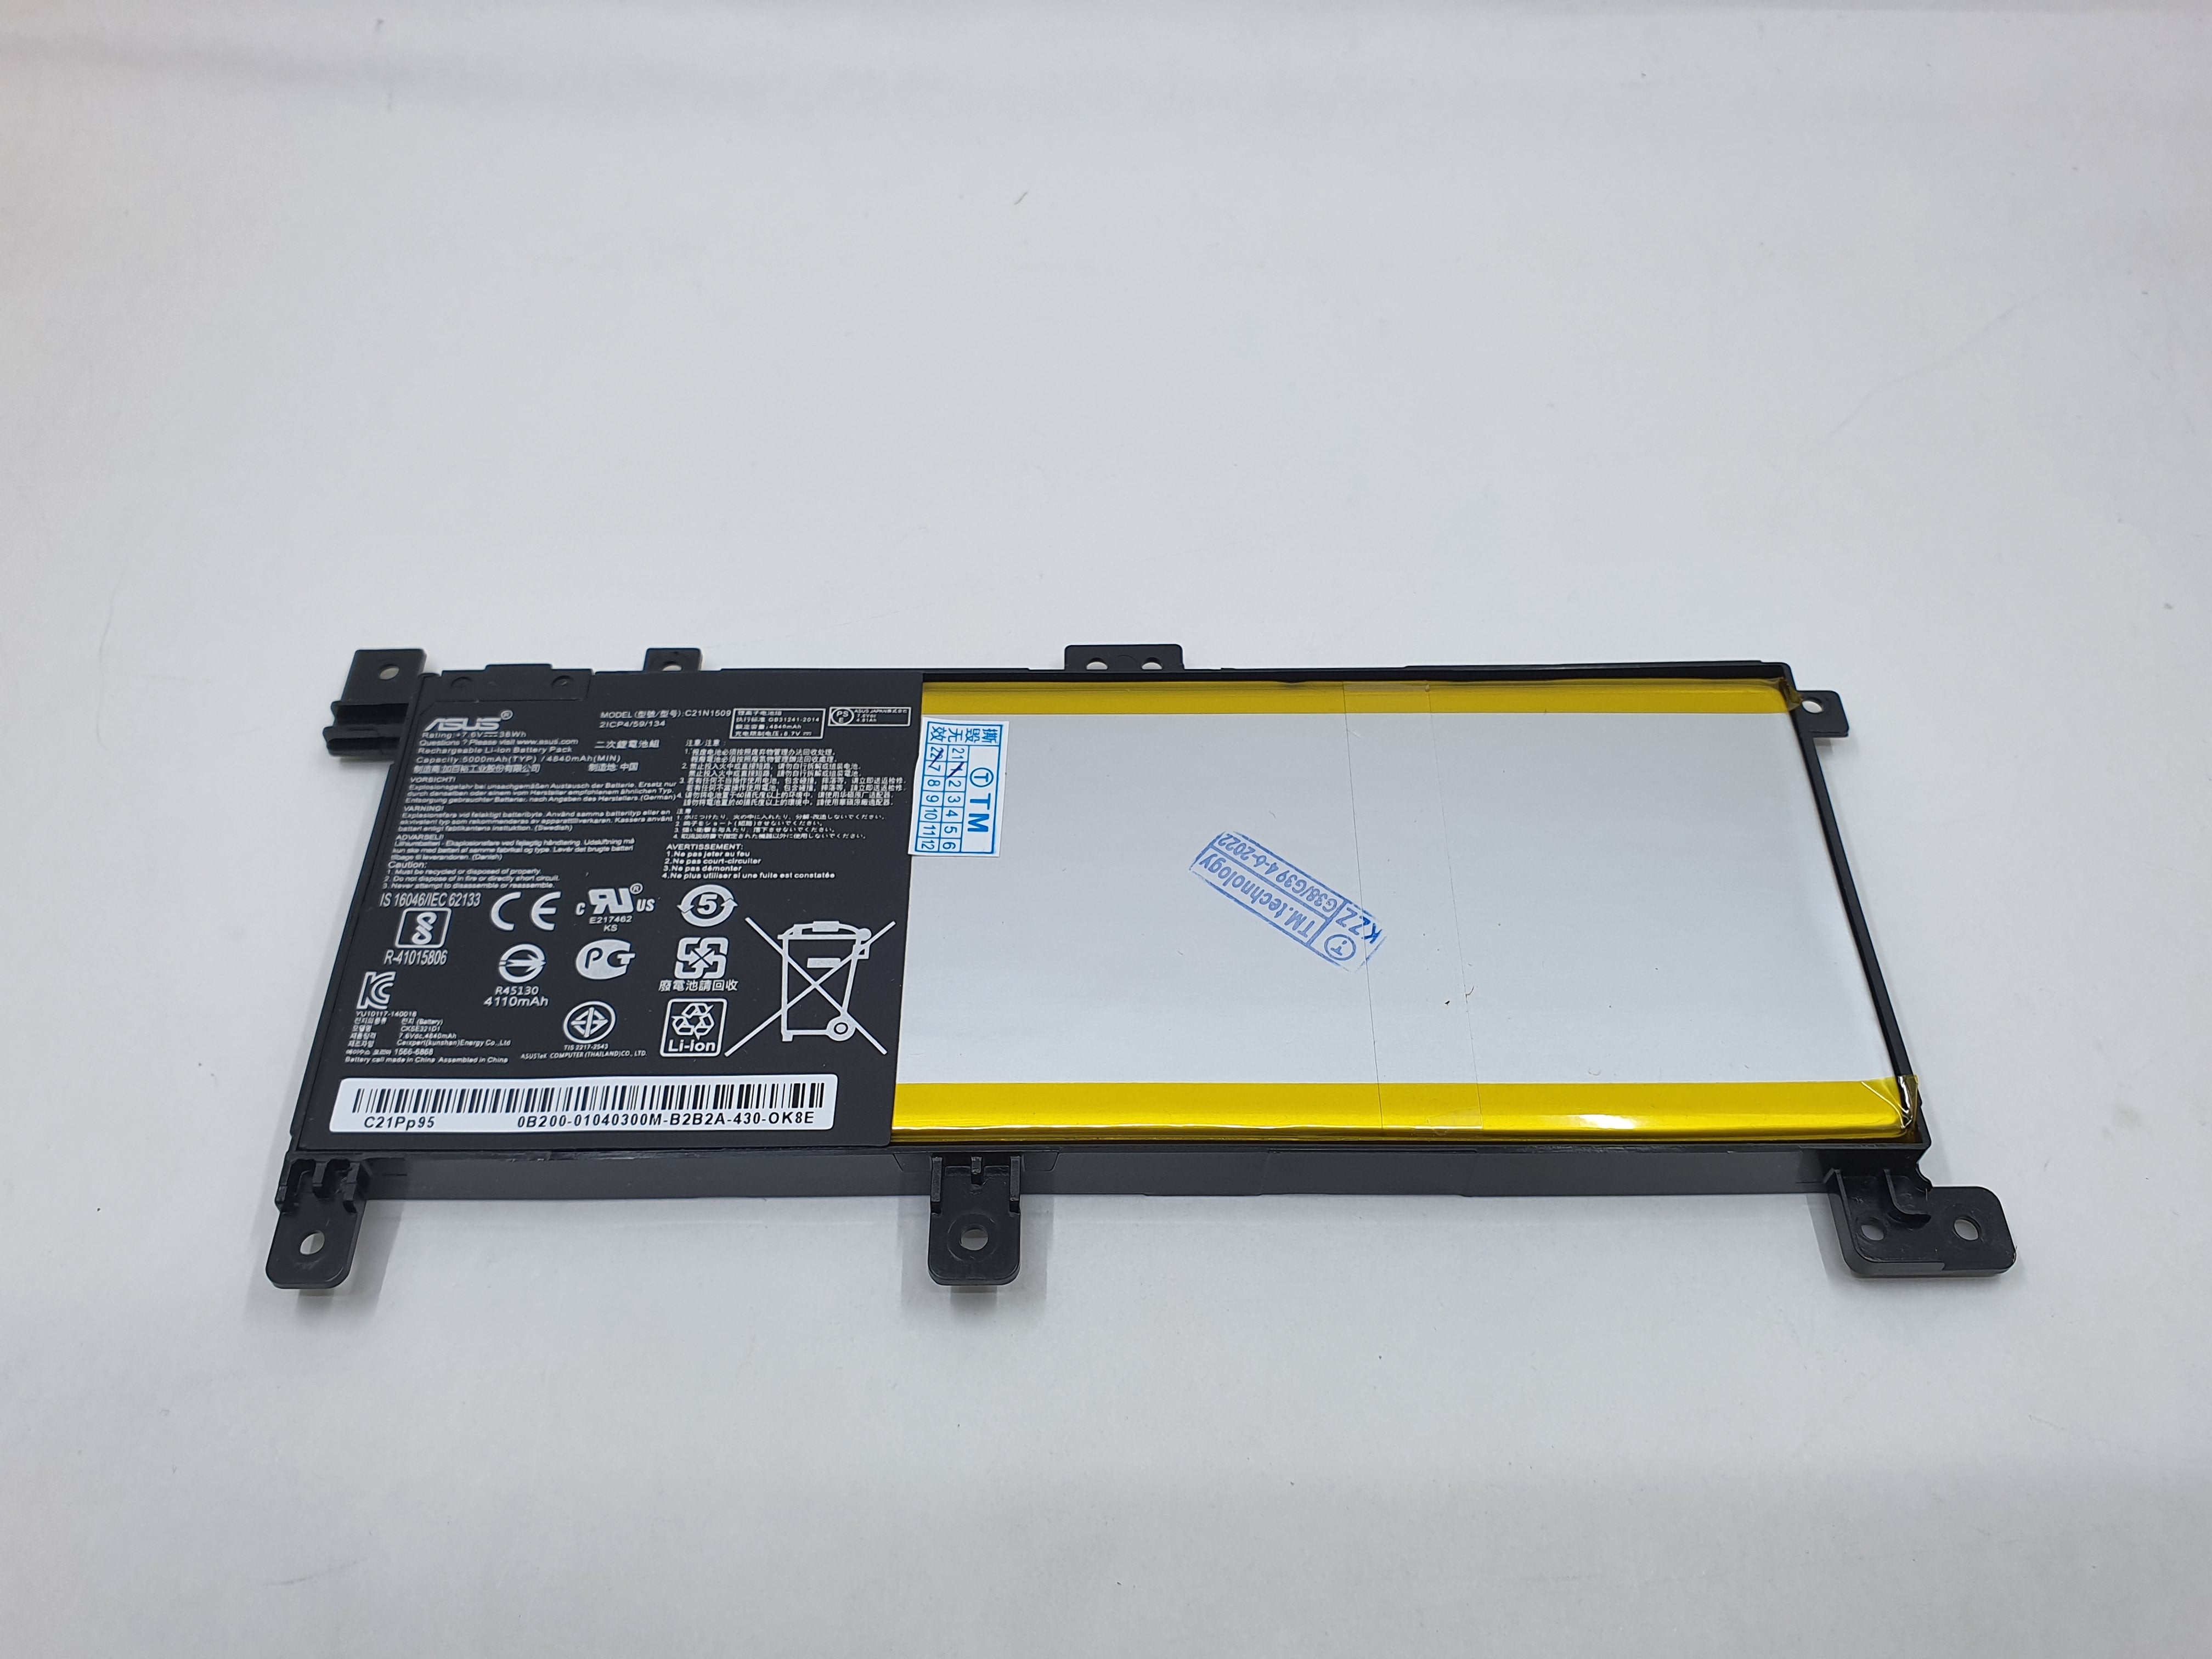 Asus Battery X556UB A1 for Asus X556UB